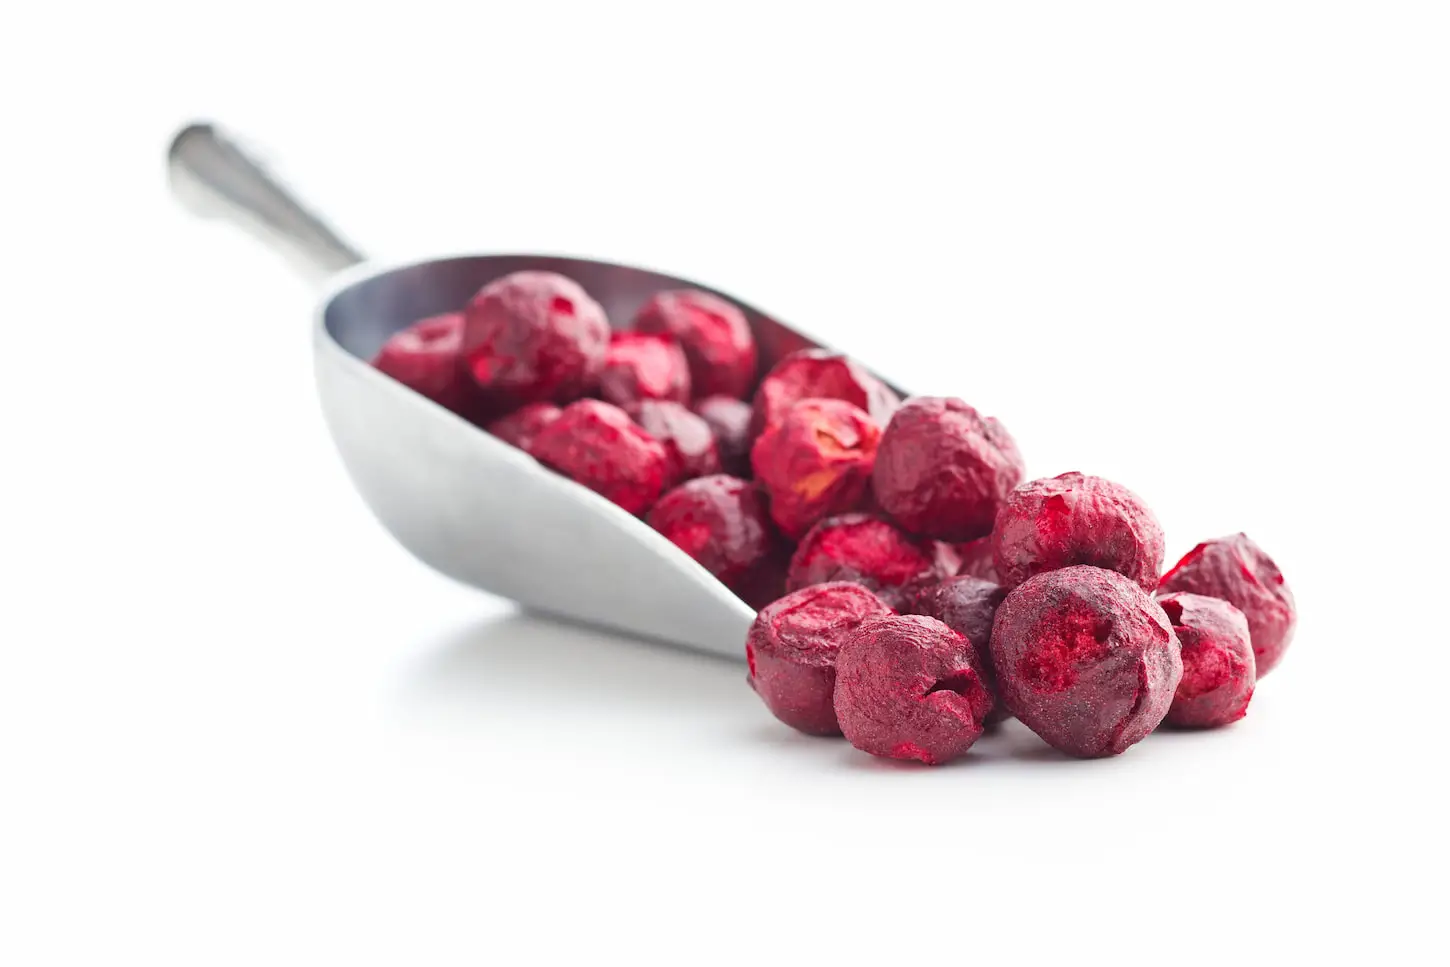 An image of freeze-dried cherries on a white background.